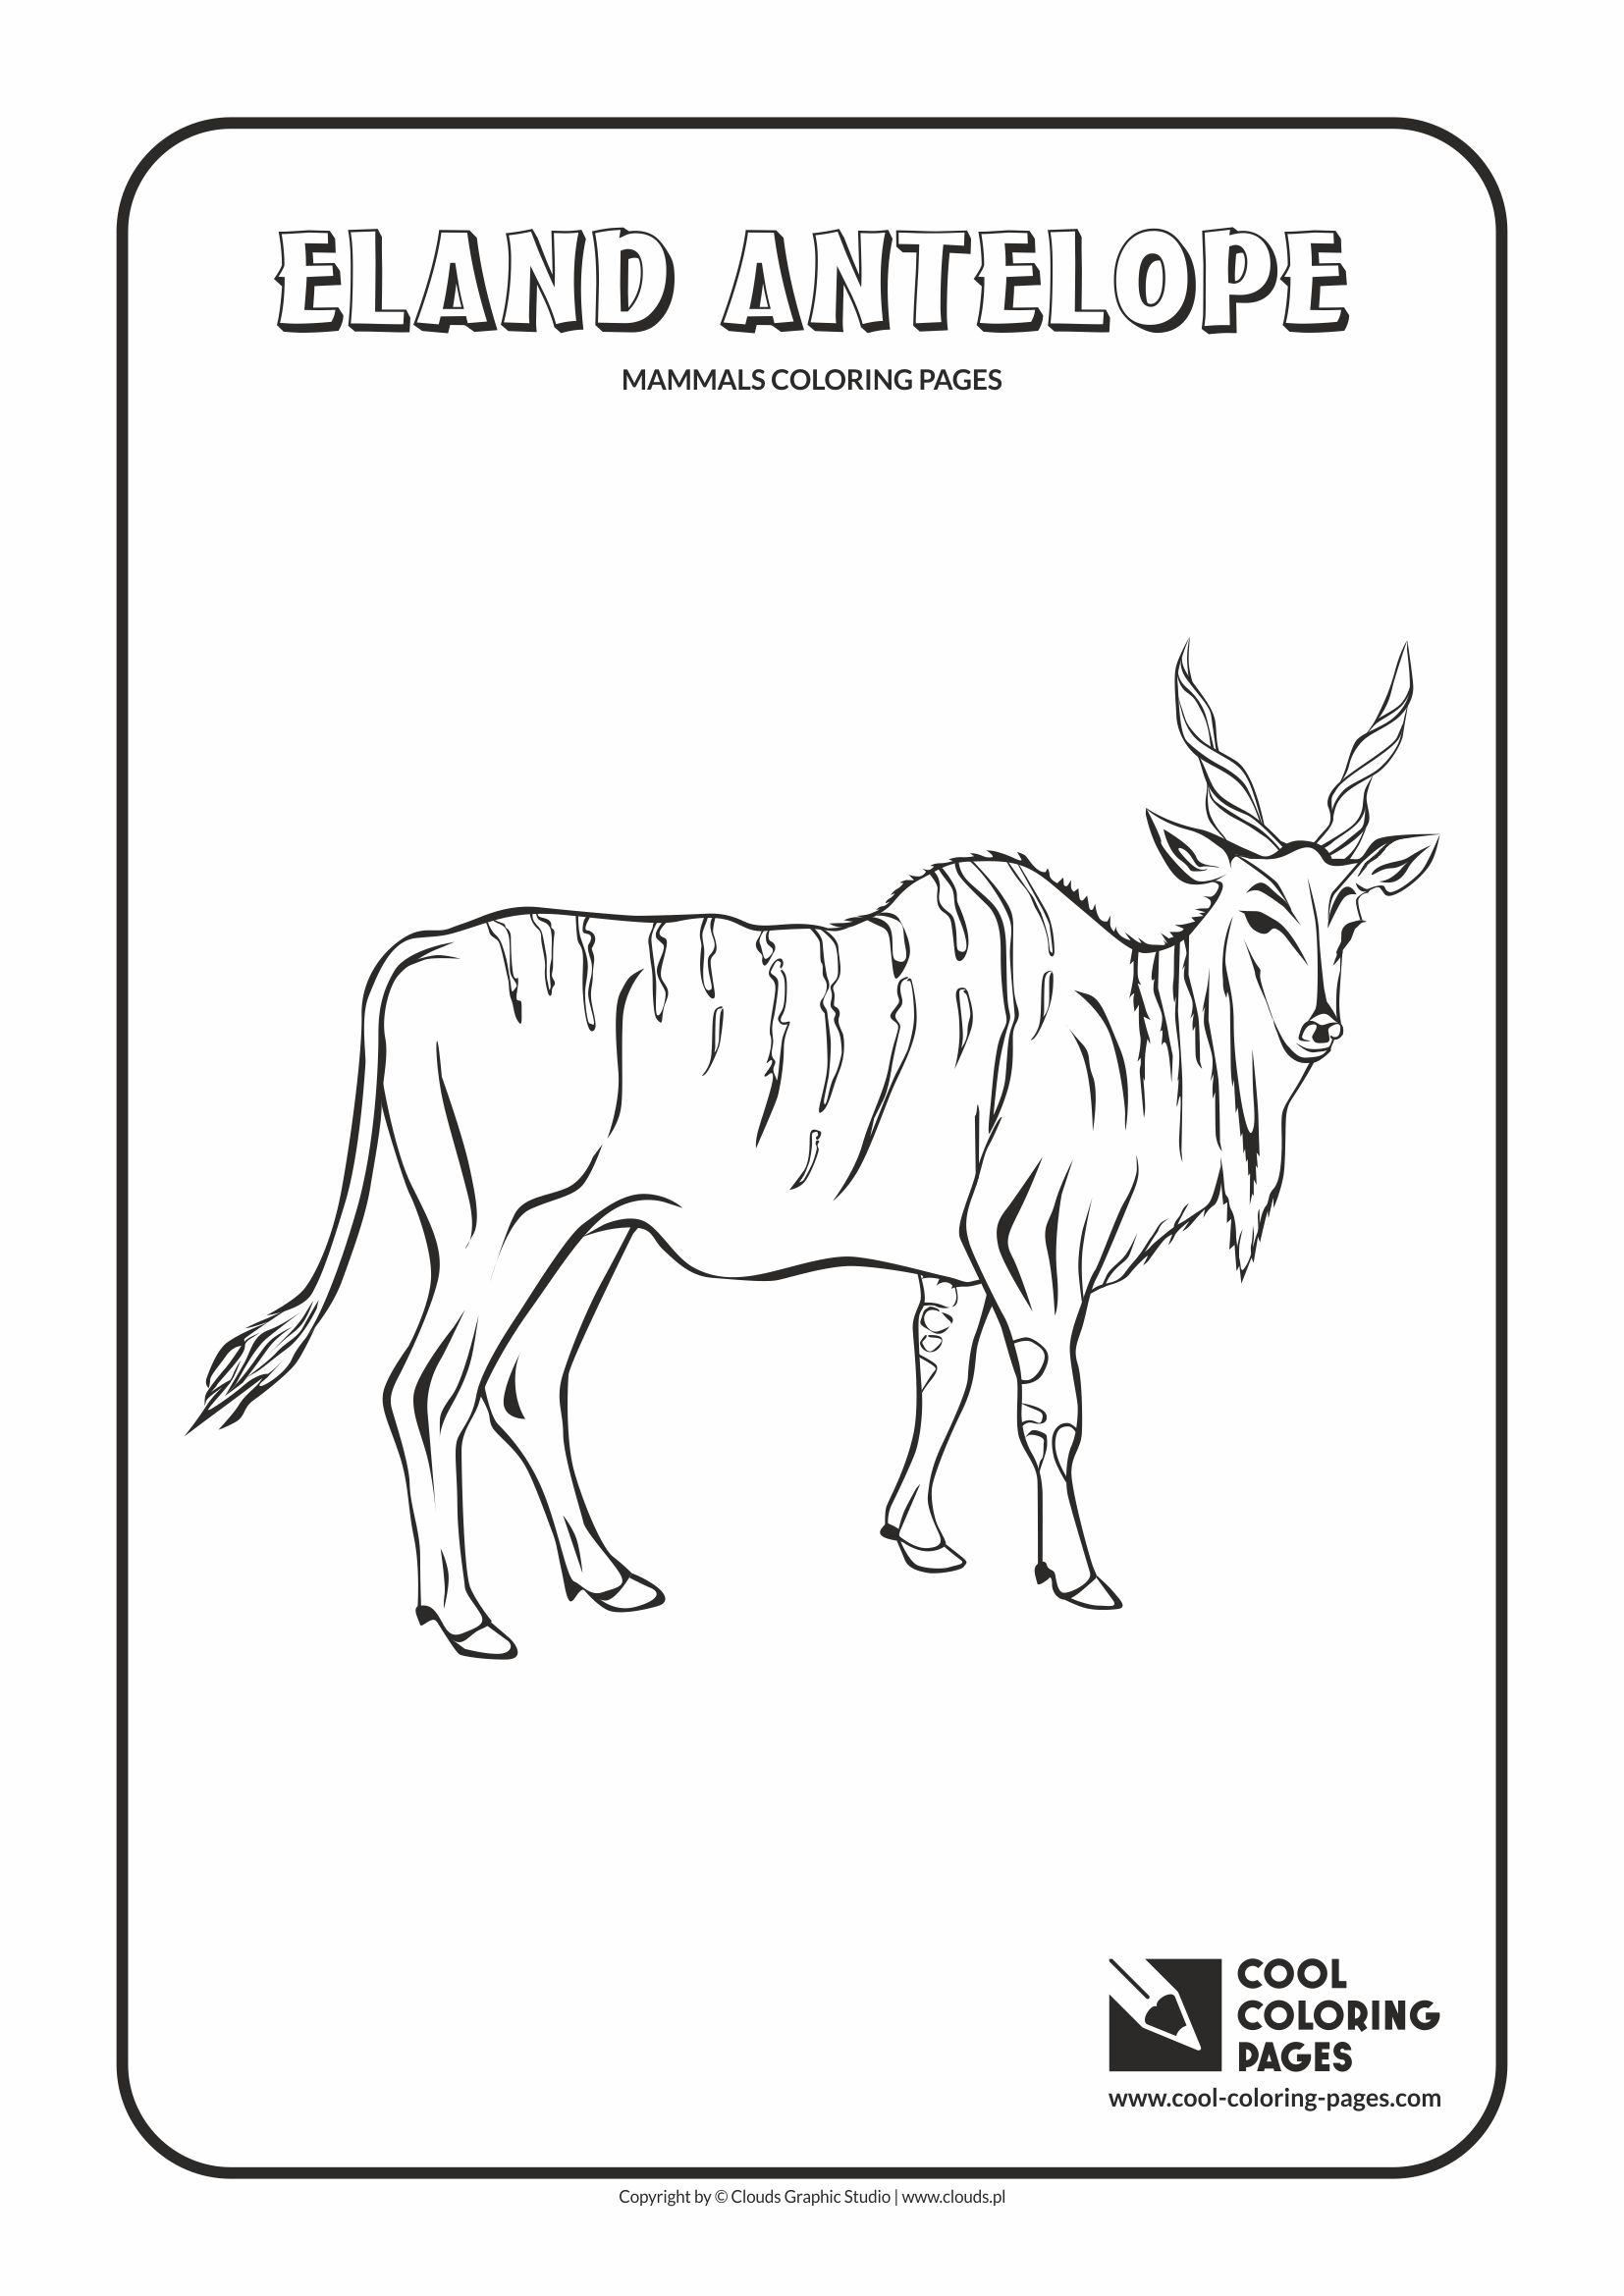 Cool Coloring Pages - Animals / Antelope eland / Coloring page with antelope eland